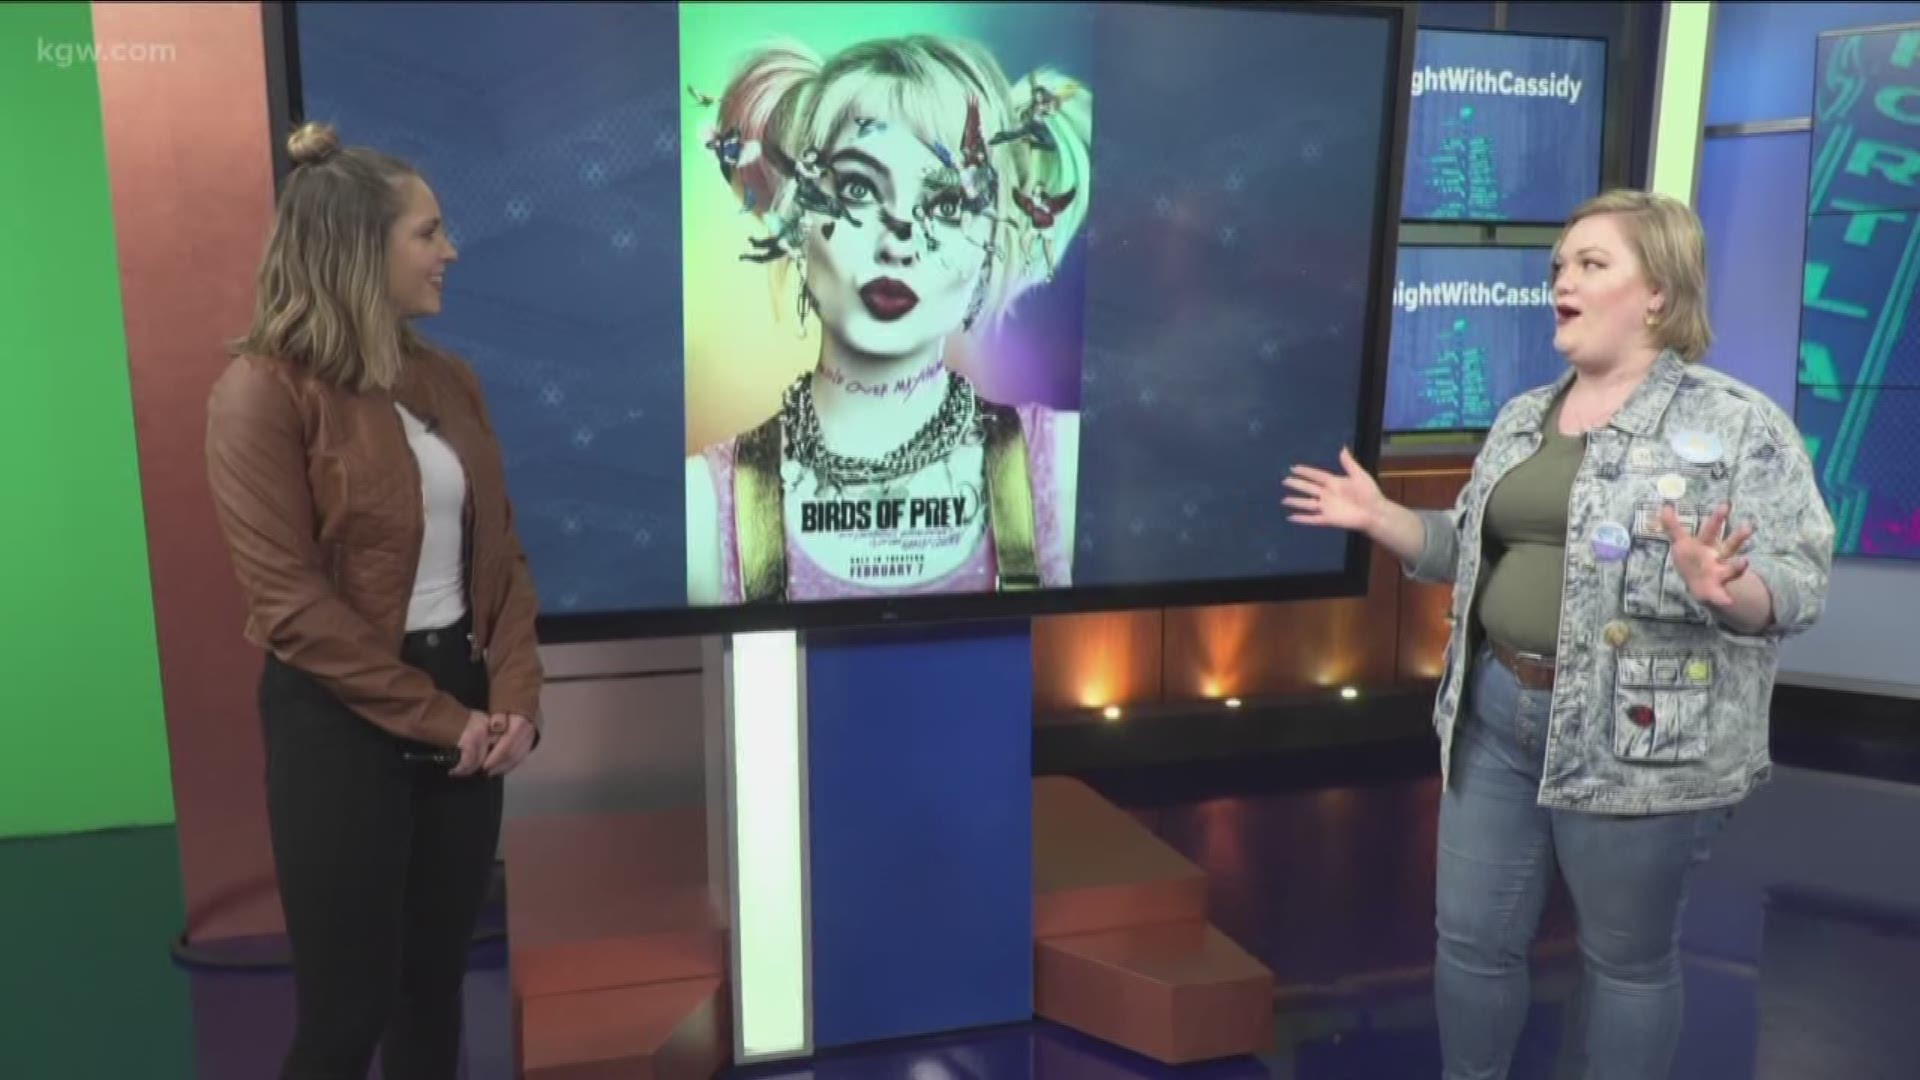 Are you excited to see 'Birds of Prey' in theaters next month?
kgw.com/comics
#TonightwithCassidy